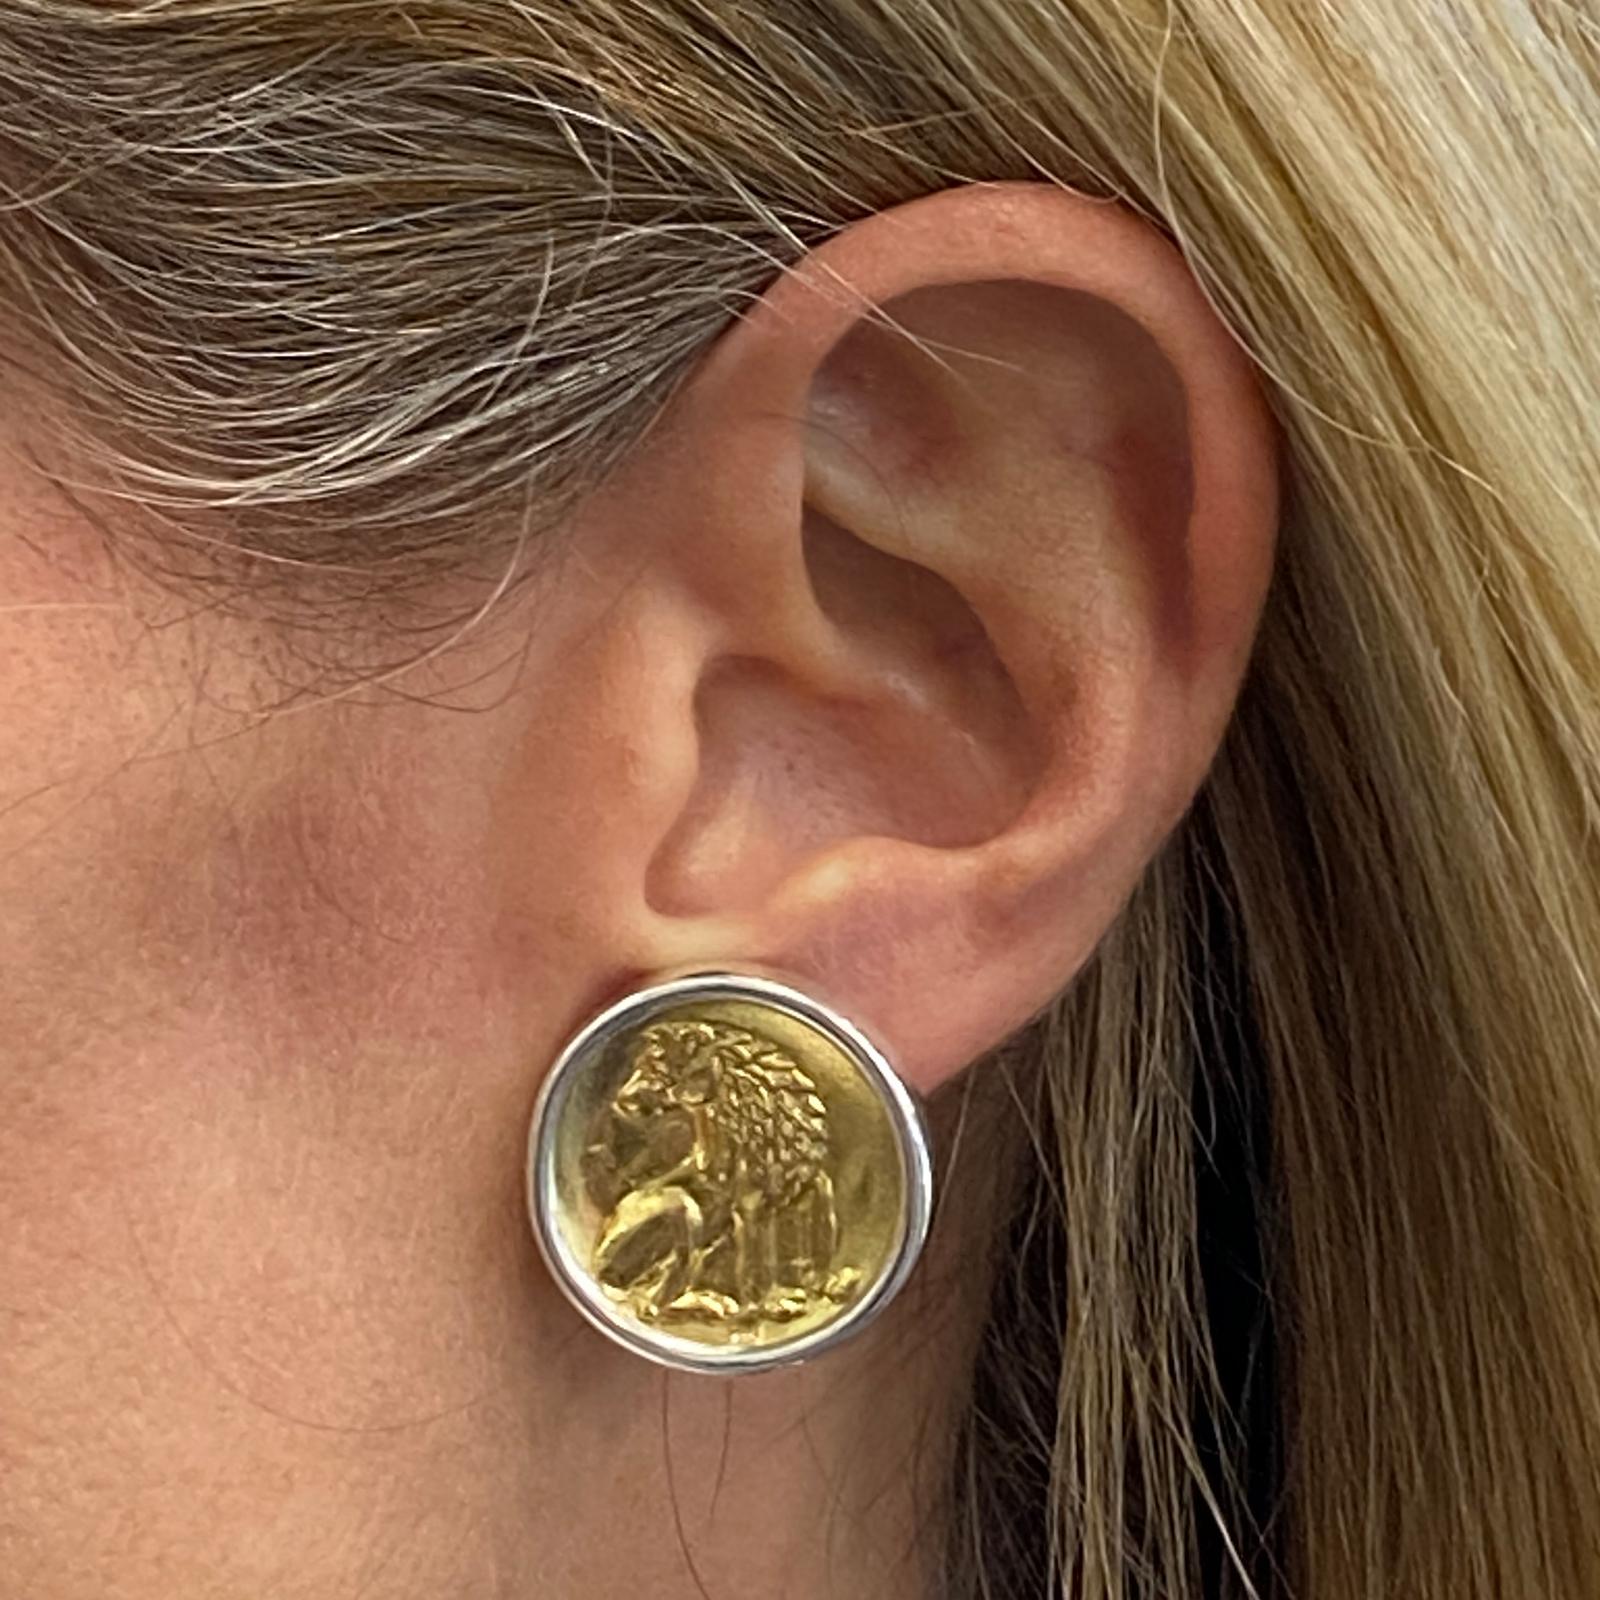 Designer earrings by Ilias Lalaounis are fashioned in sterling silver. The coin shape earrings feature an embossed wolf on gold plated sterling silver centers. The earrings are clip backs, and signed Greece 925 A21 with Lalaounis hallmark. 